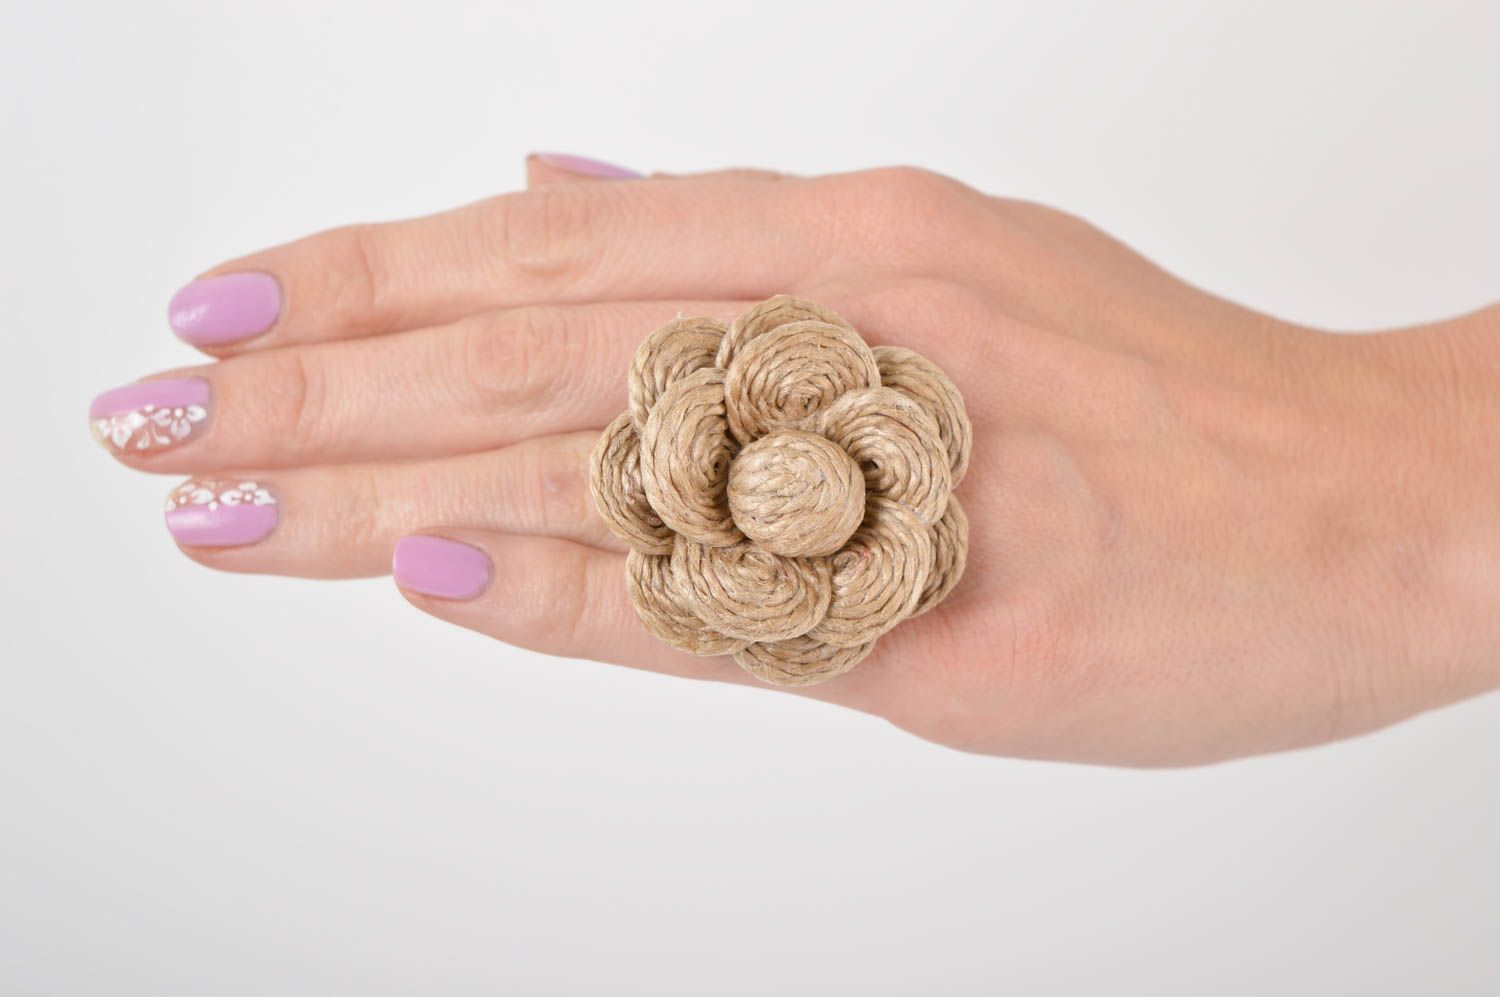 Beautiful handmade flower ring cool jewelry designs small gifts for her photo 5